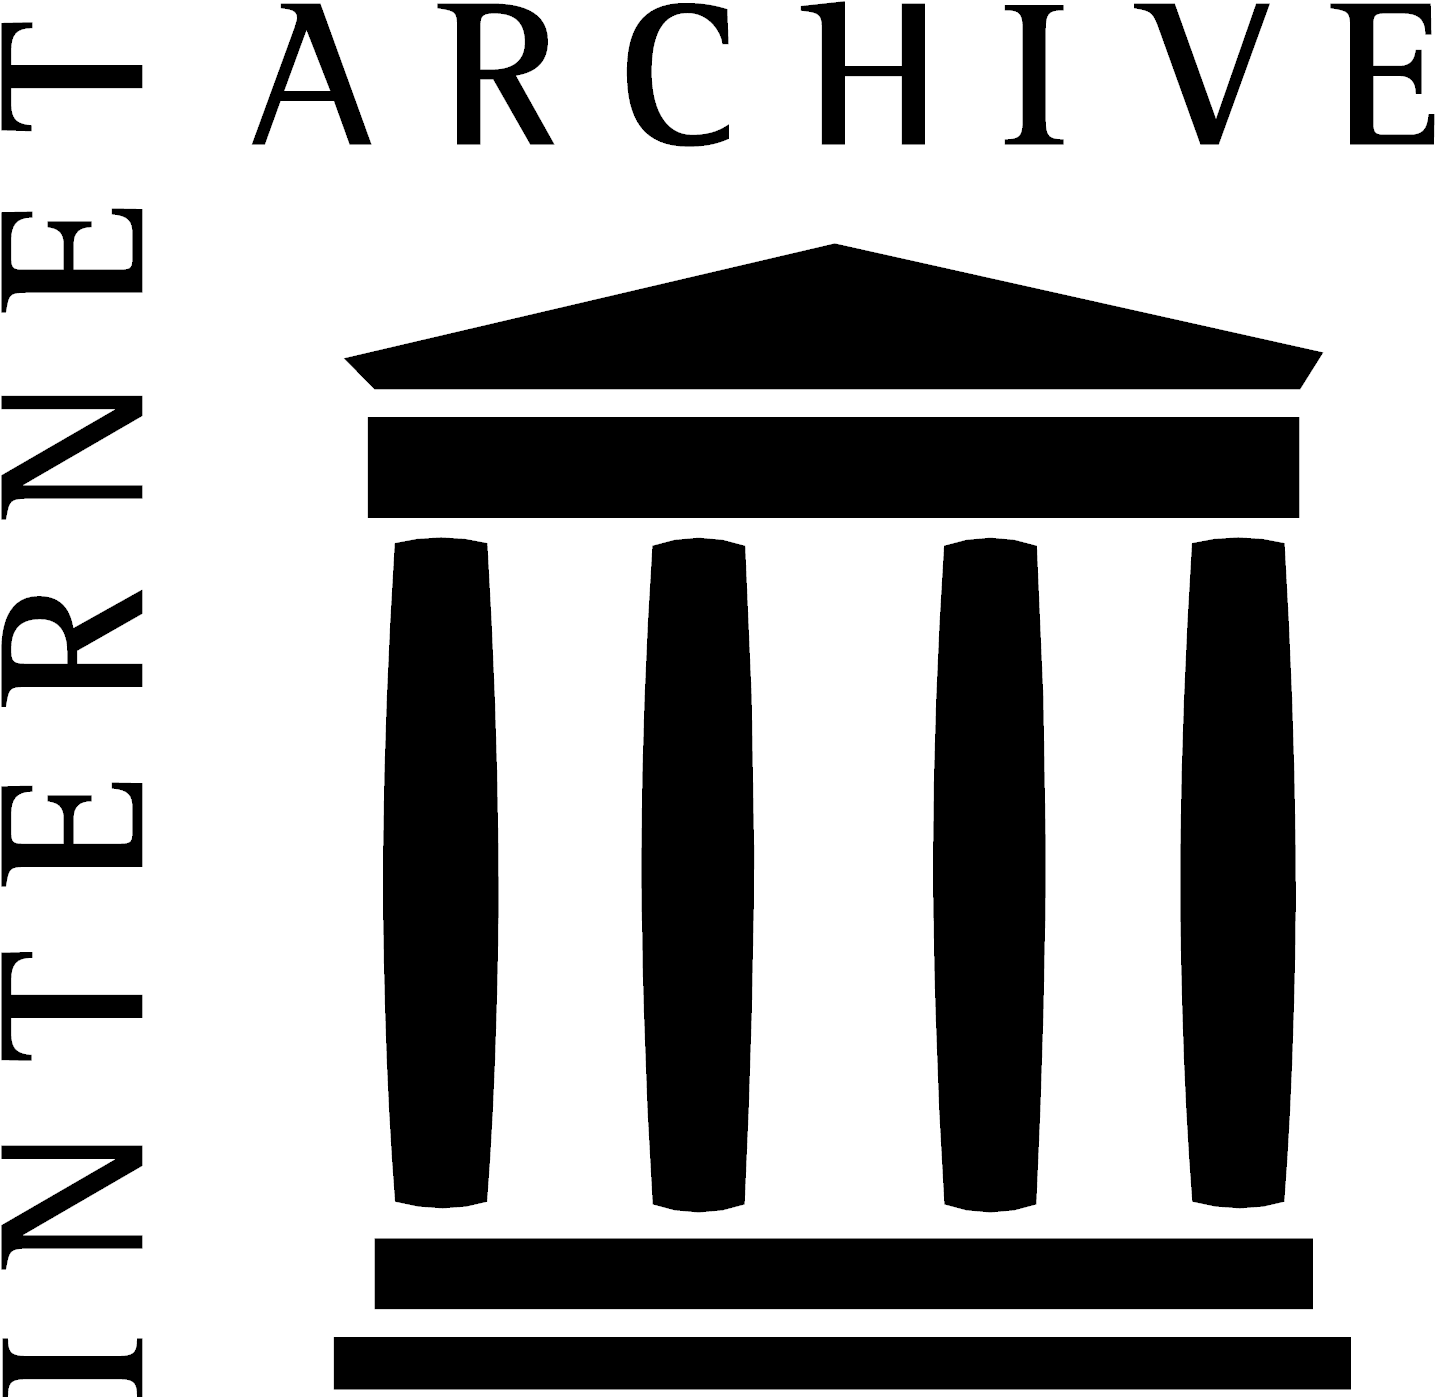 Internet Archive Logo And Wordmark - Internet Archive Archive Org (1598x1598)